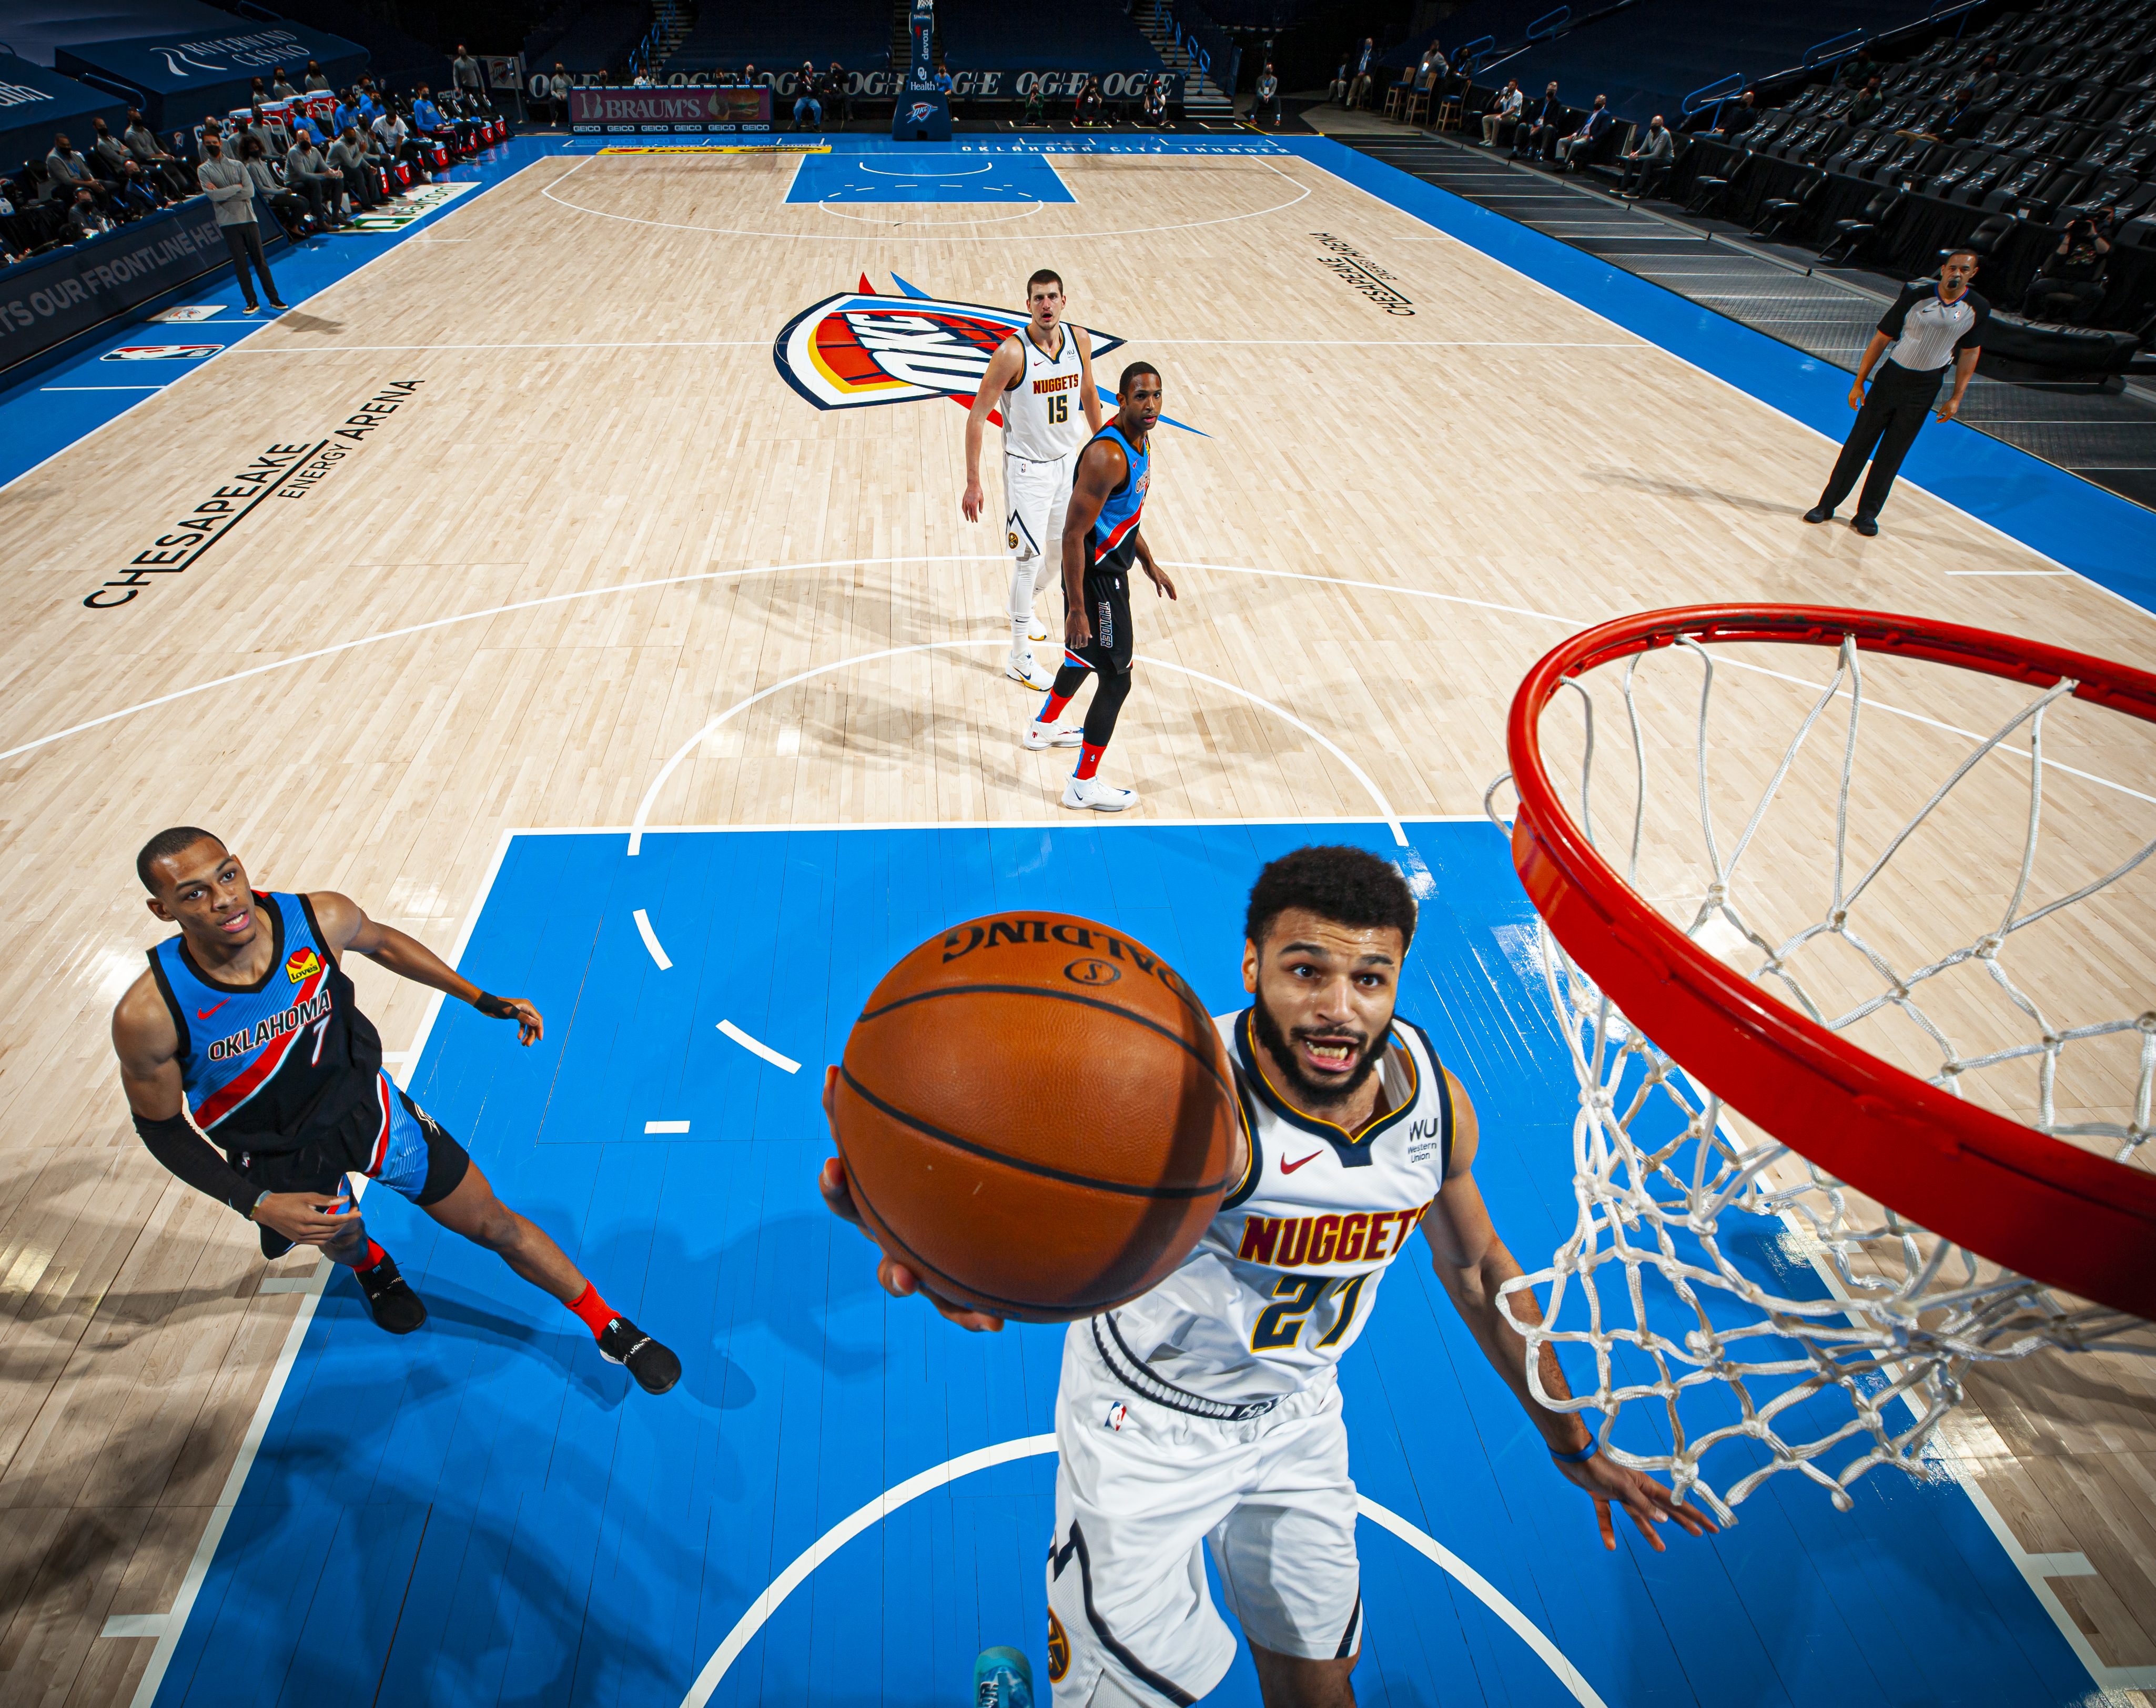 Jamal Murray of the Denver Nuggets shoots the ball during the game against the Oklahoma City Thunder on February 27, 2021 at Chesapeake Energy Arena in Oklahoma City, Oklahoma.&nbsp;